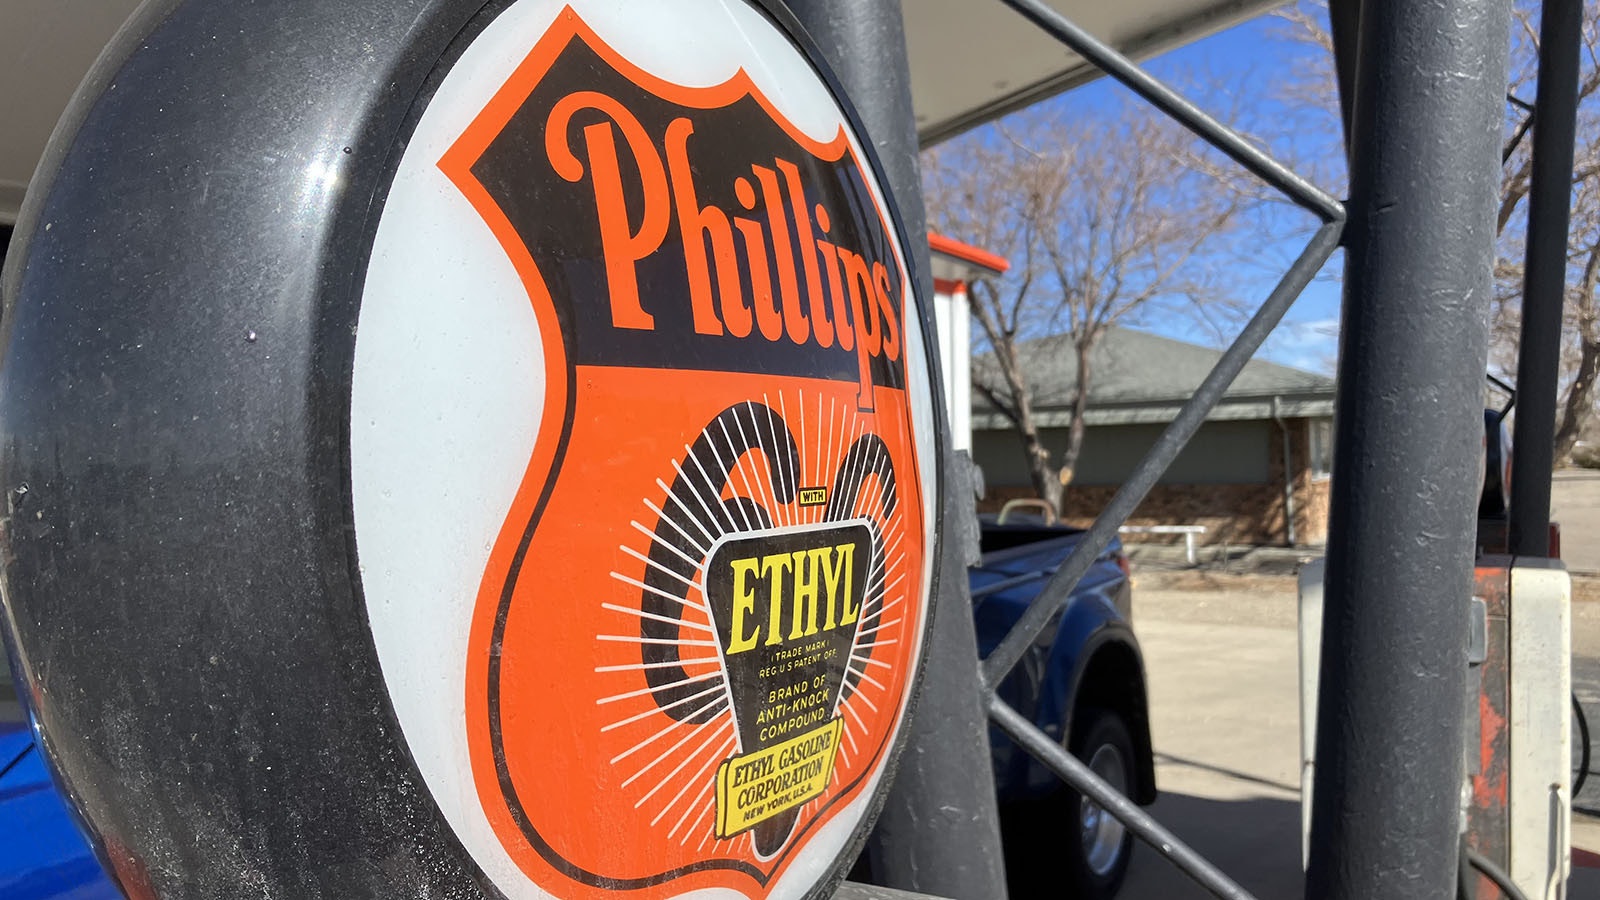 A pump head shows the Phillips 66 logo and colors that existed from 1930-1959.